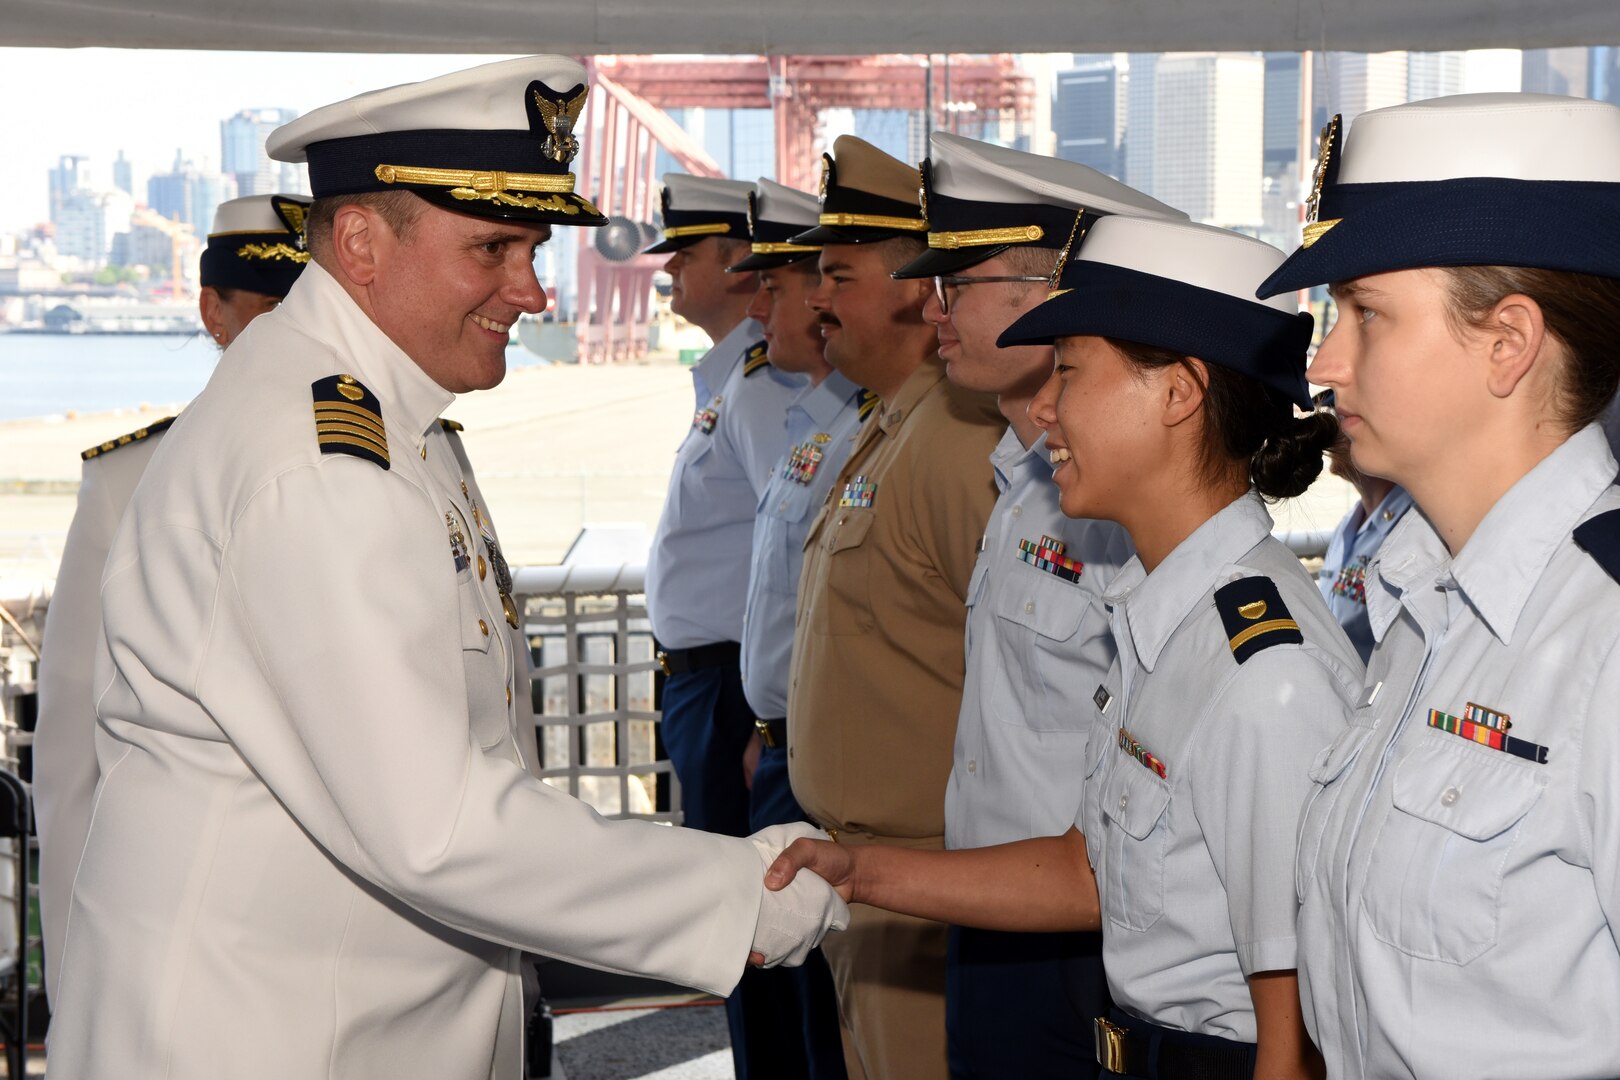 Capt. Kenneth Boda, commanding officer of Coast Guard Cutter Healy (WAGB 20) shakes hands with a member of the crew while conducting an inspection during a change of command ceremony aboard Healy, June 29, 2023, at Base Seattle. Capt. Michele Schallip relieved Boda as commanding officer and will assume command, beginning her fifth tour afloat. (U.S. Coast Guard photo by Petty Officer 2nd Class Michael Clark)